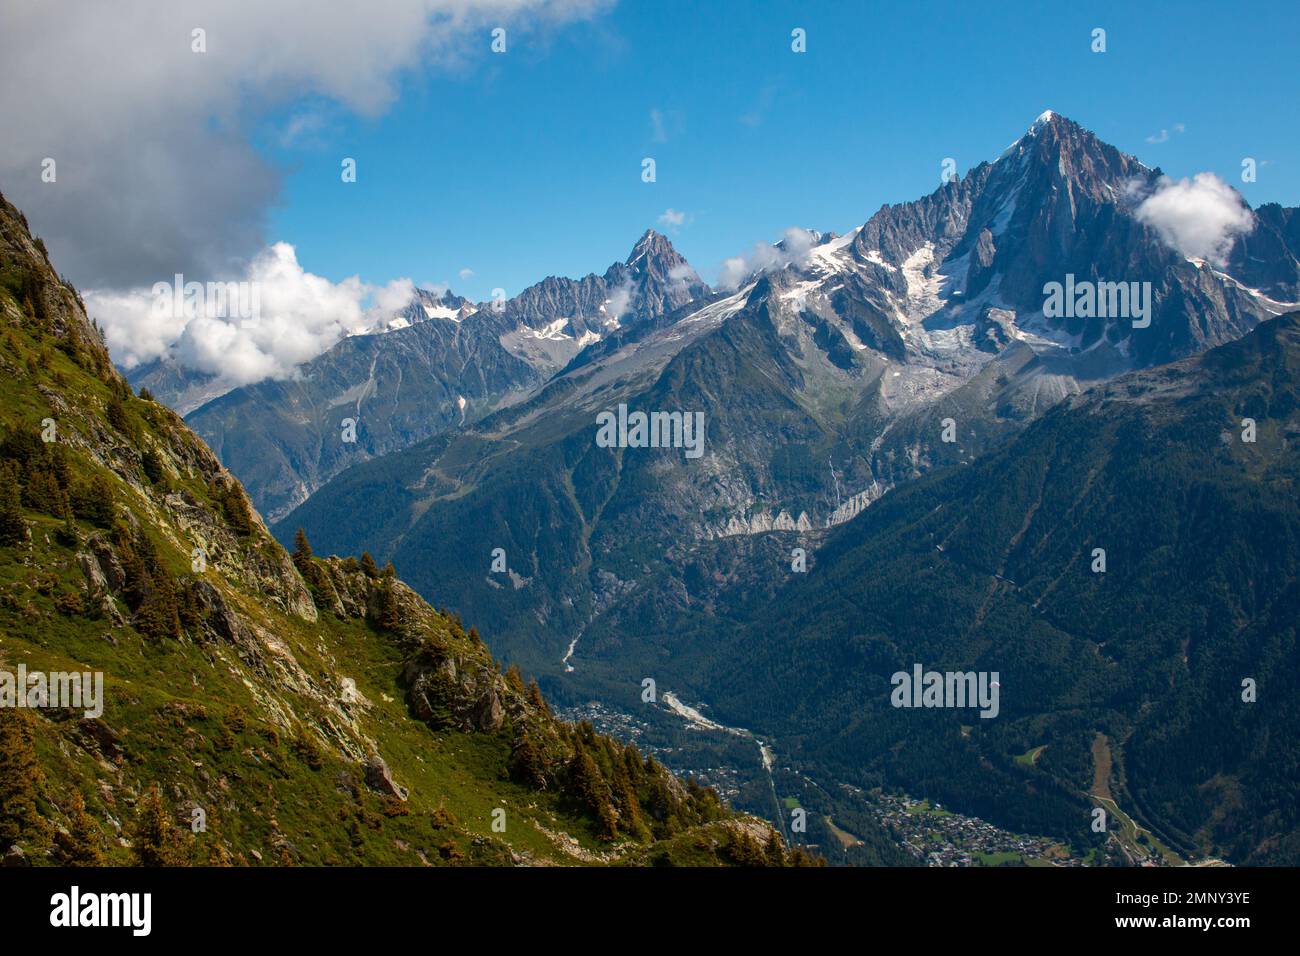 The view from a hiking trail starting at Refuge de Bellachat near Les Houches and Chamonix toward Massif du Mont Blanc. September 2021 Stock Photo